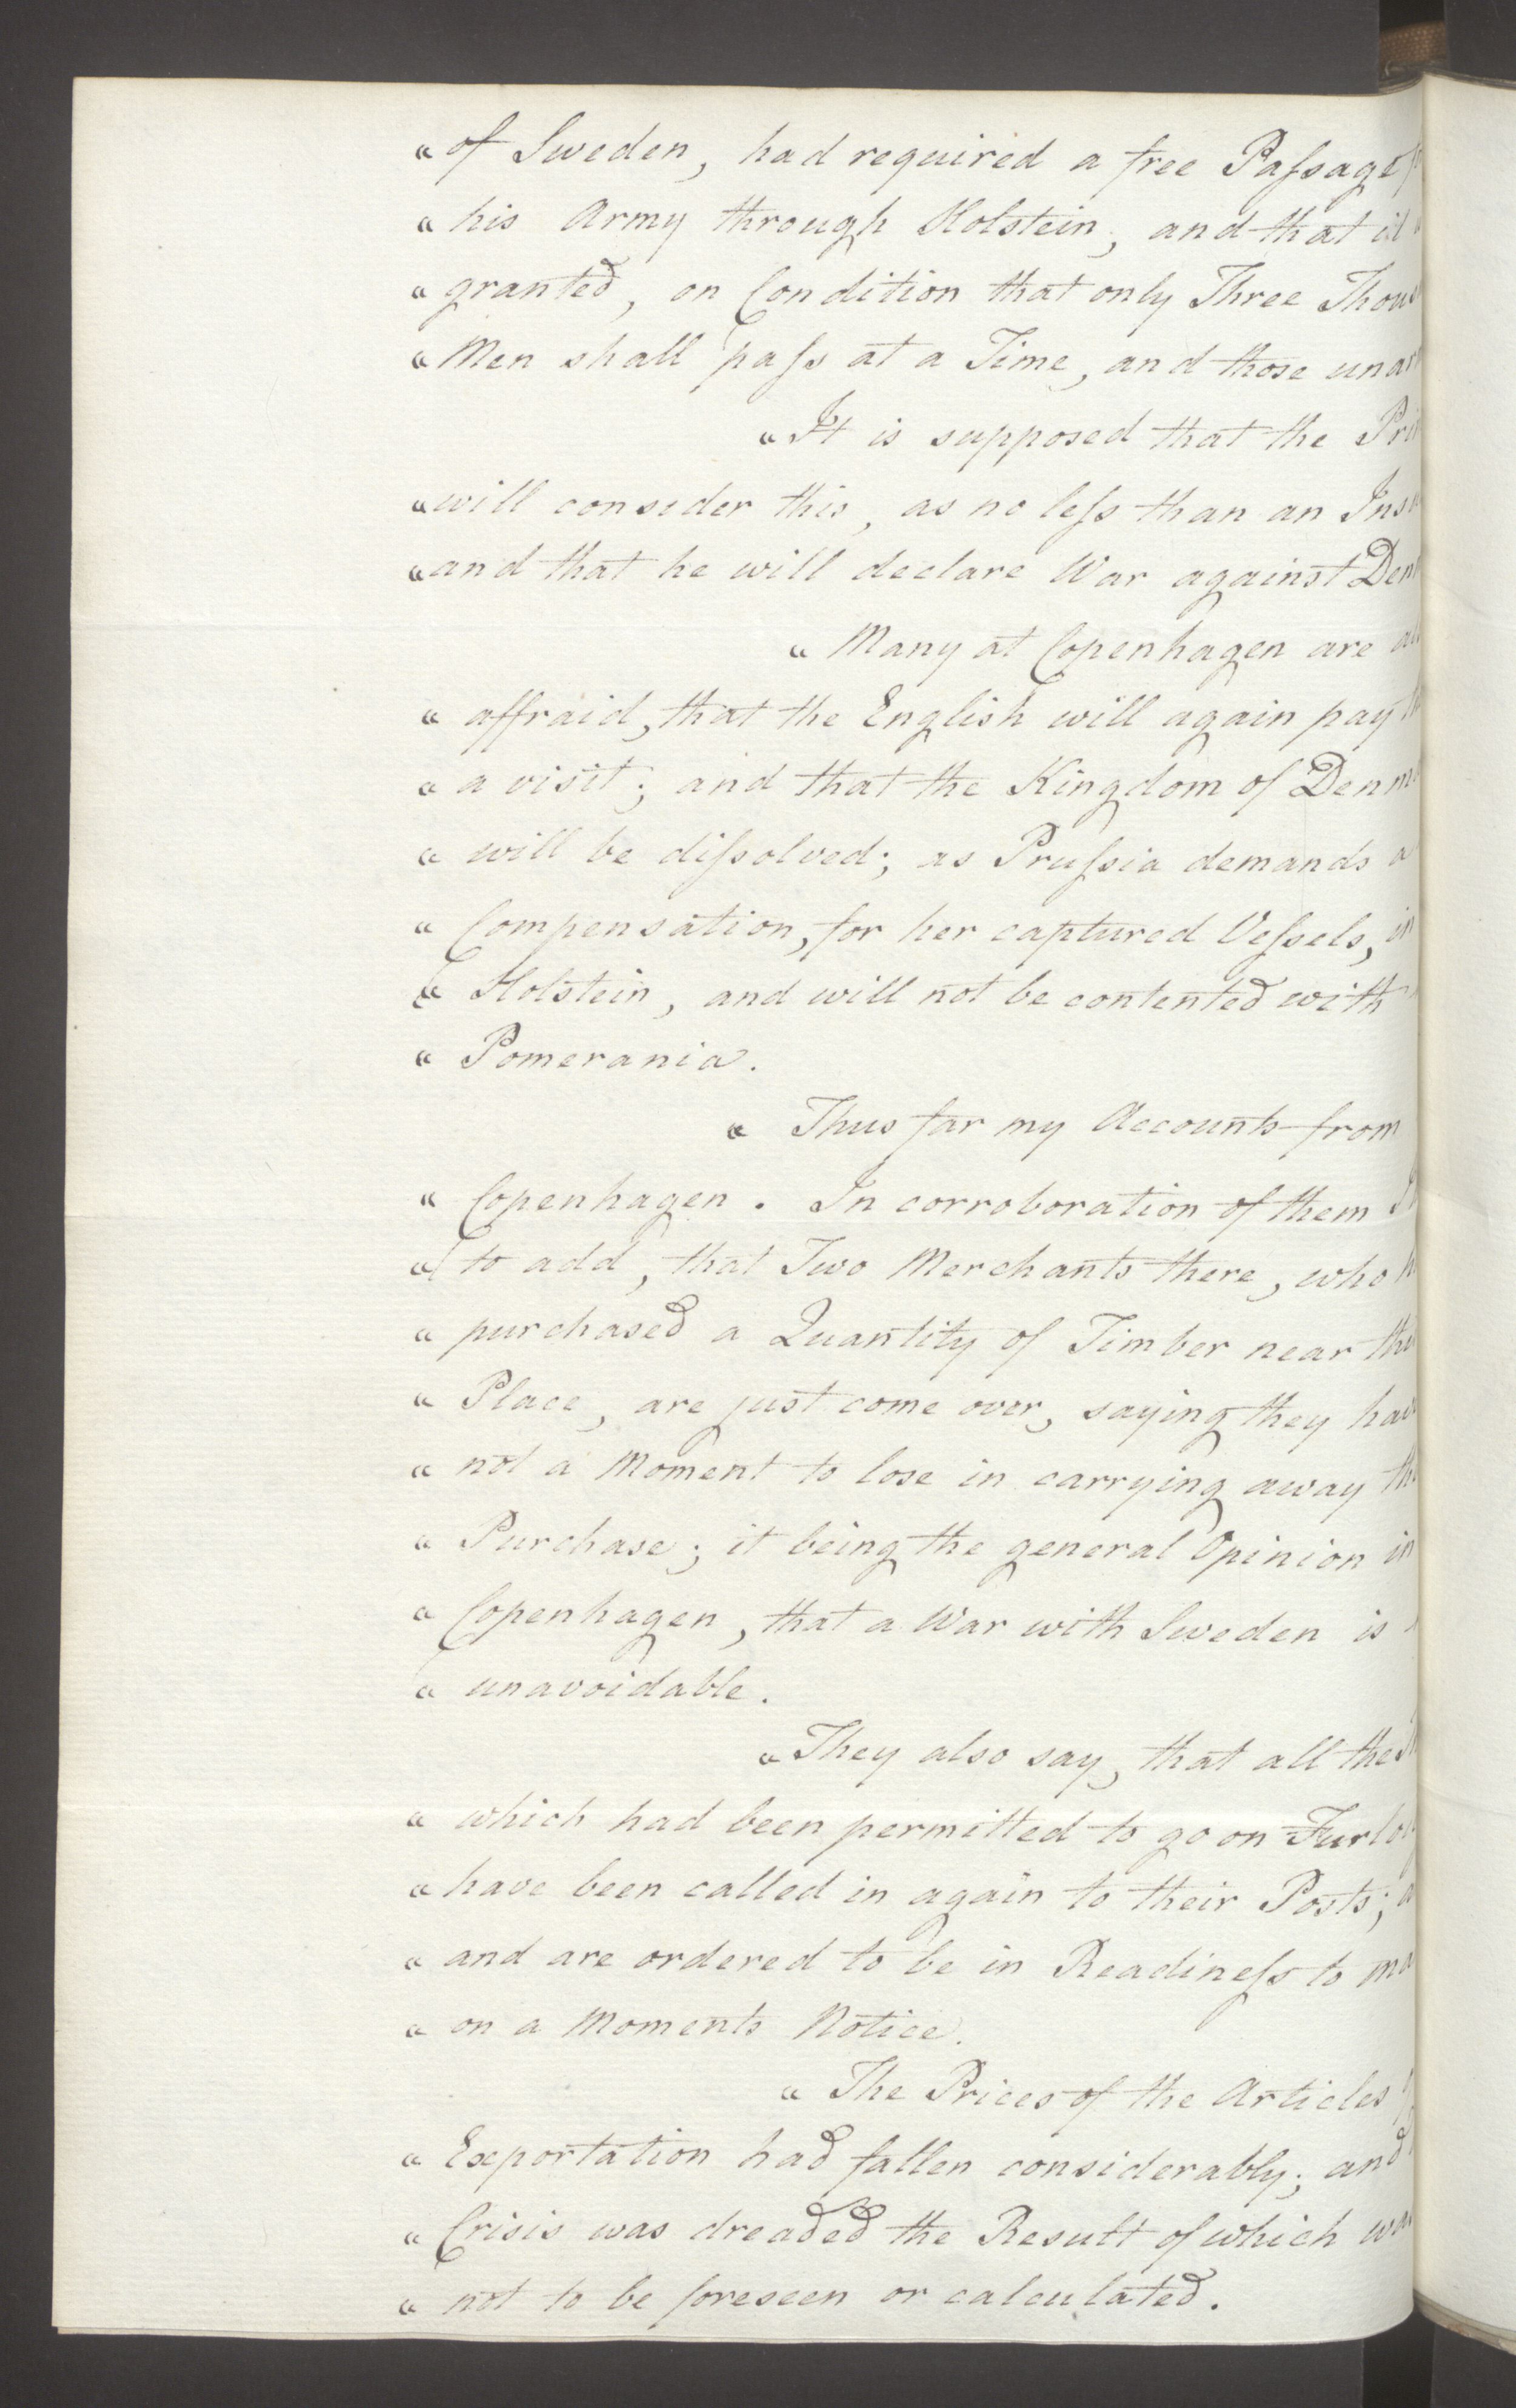 Foreign Office*, UKA/-/FO 38/16: Sir C. Gordon. Reports from Malmö, Jonkoping, and Helsingborg, 1814, s. 54